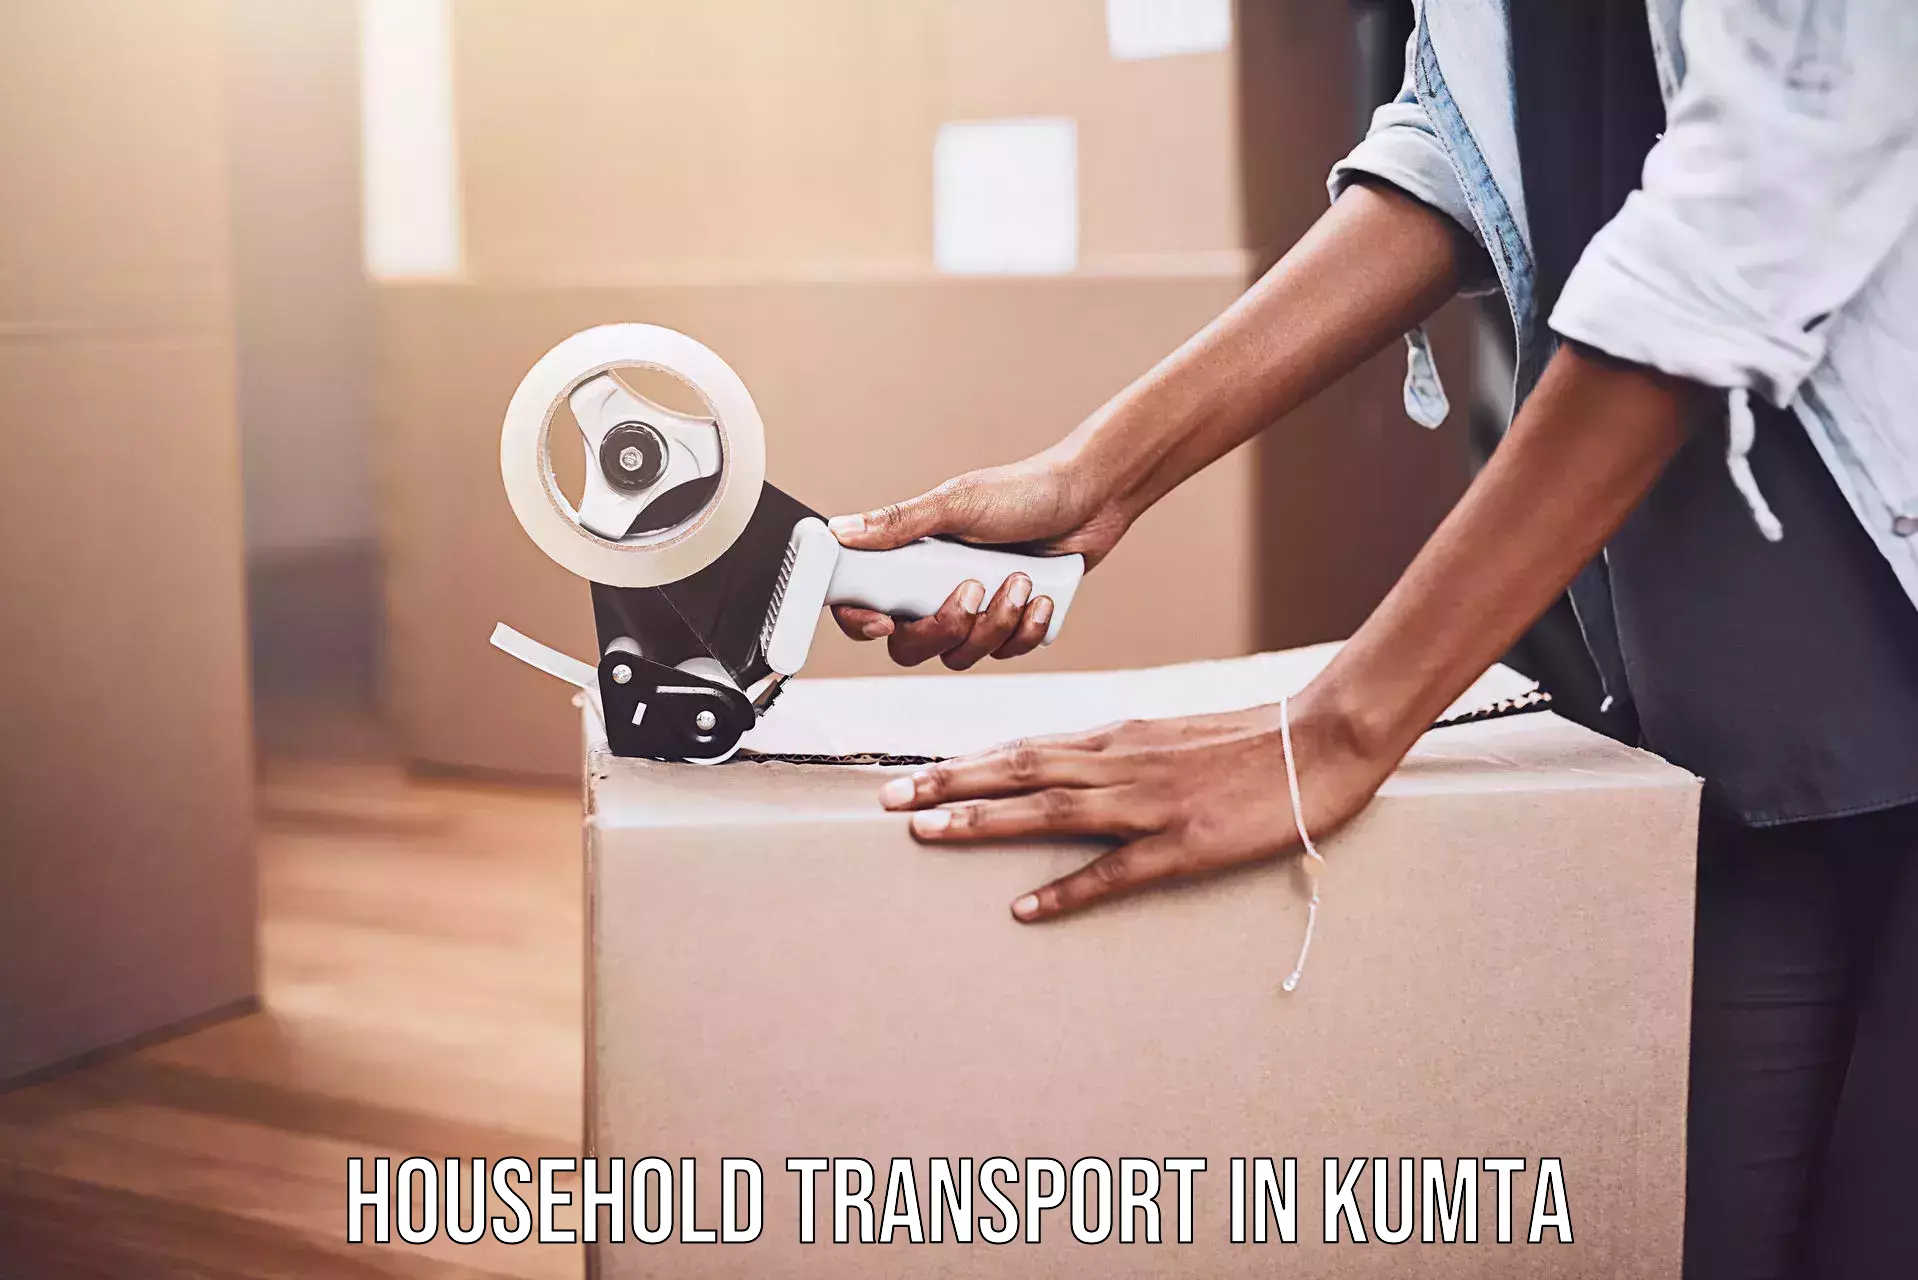 Trusted furniture movers in Kumta